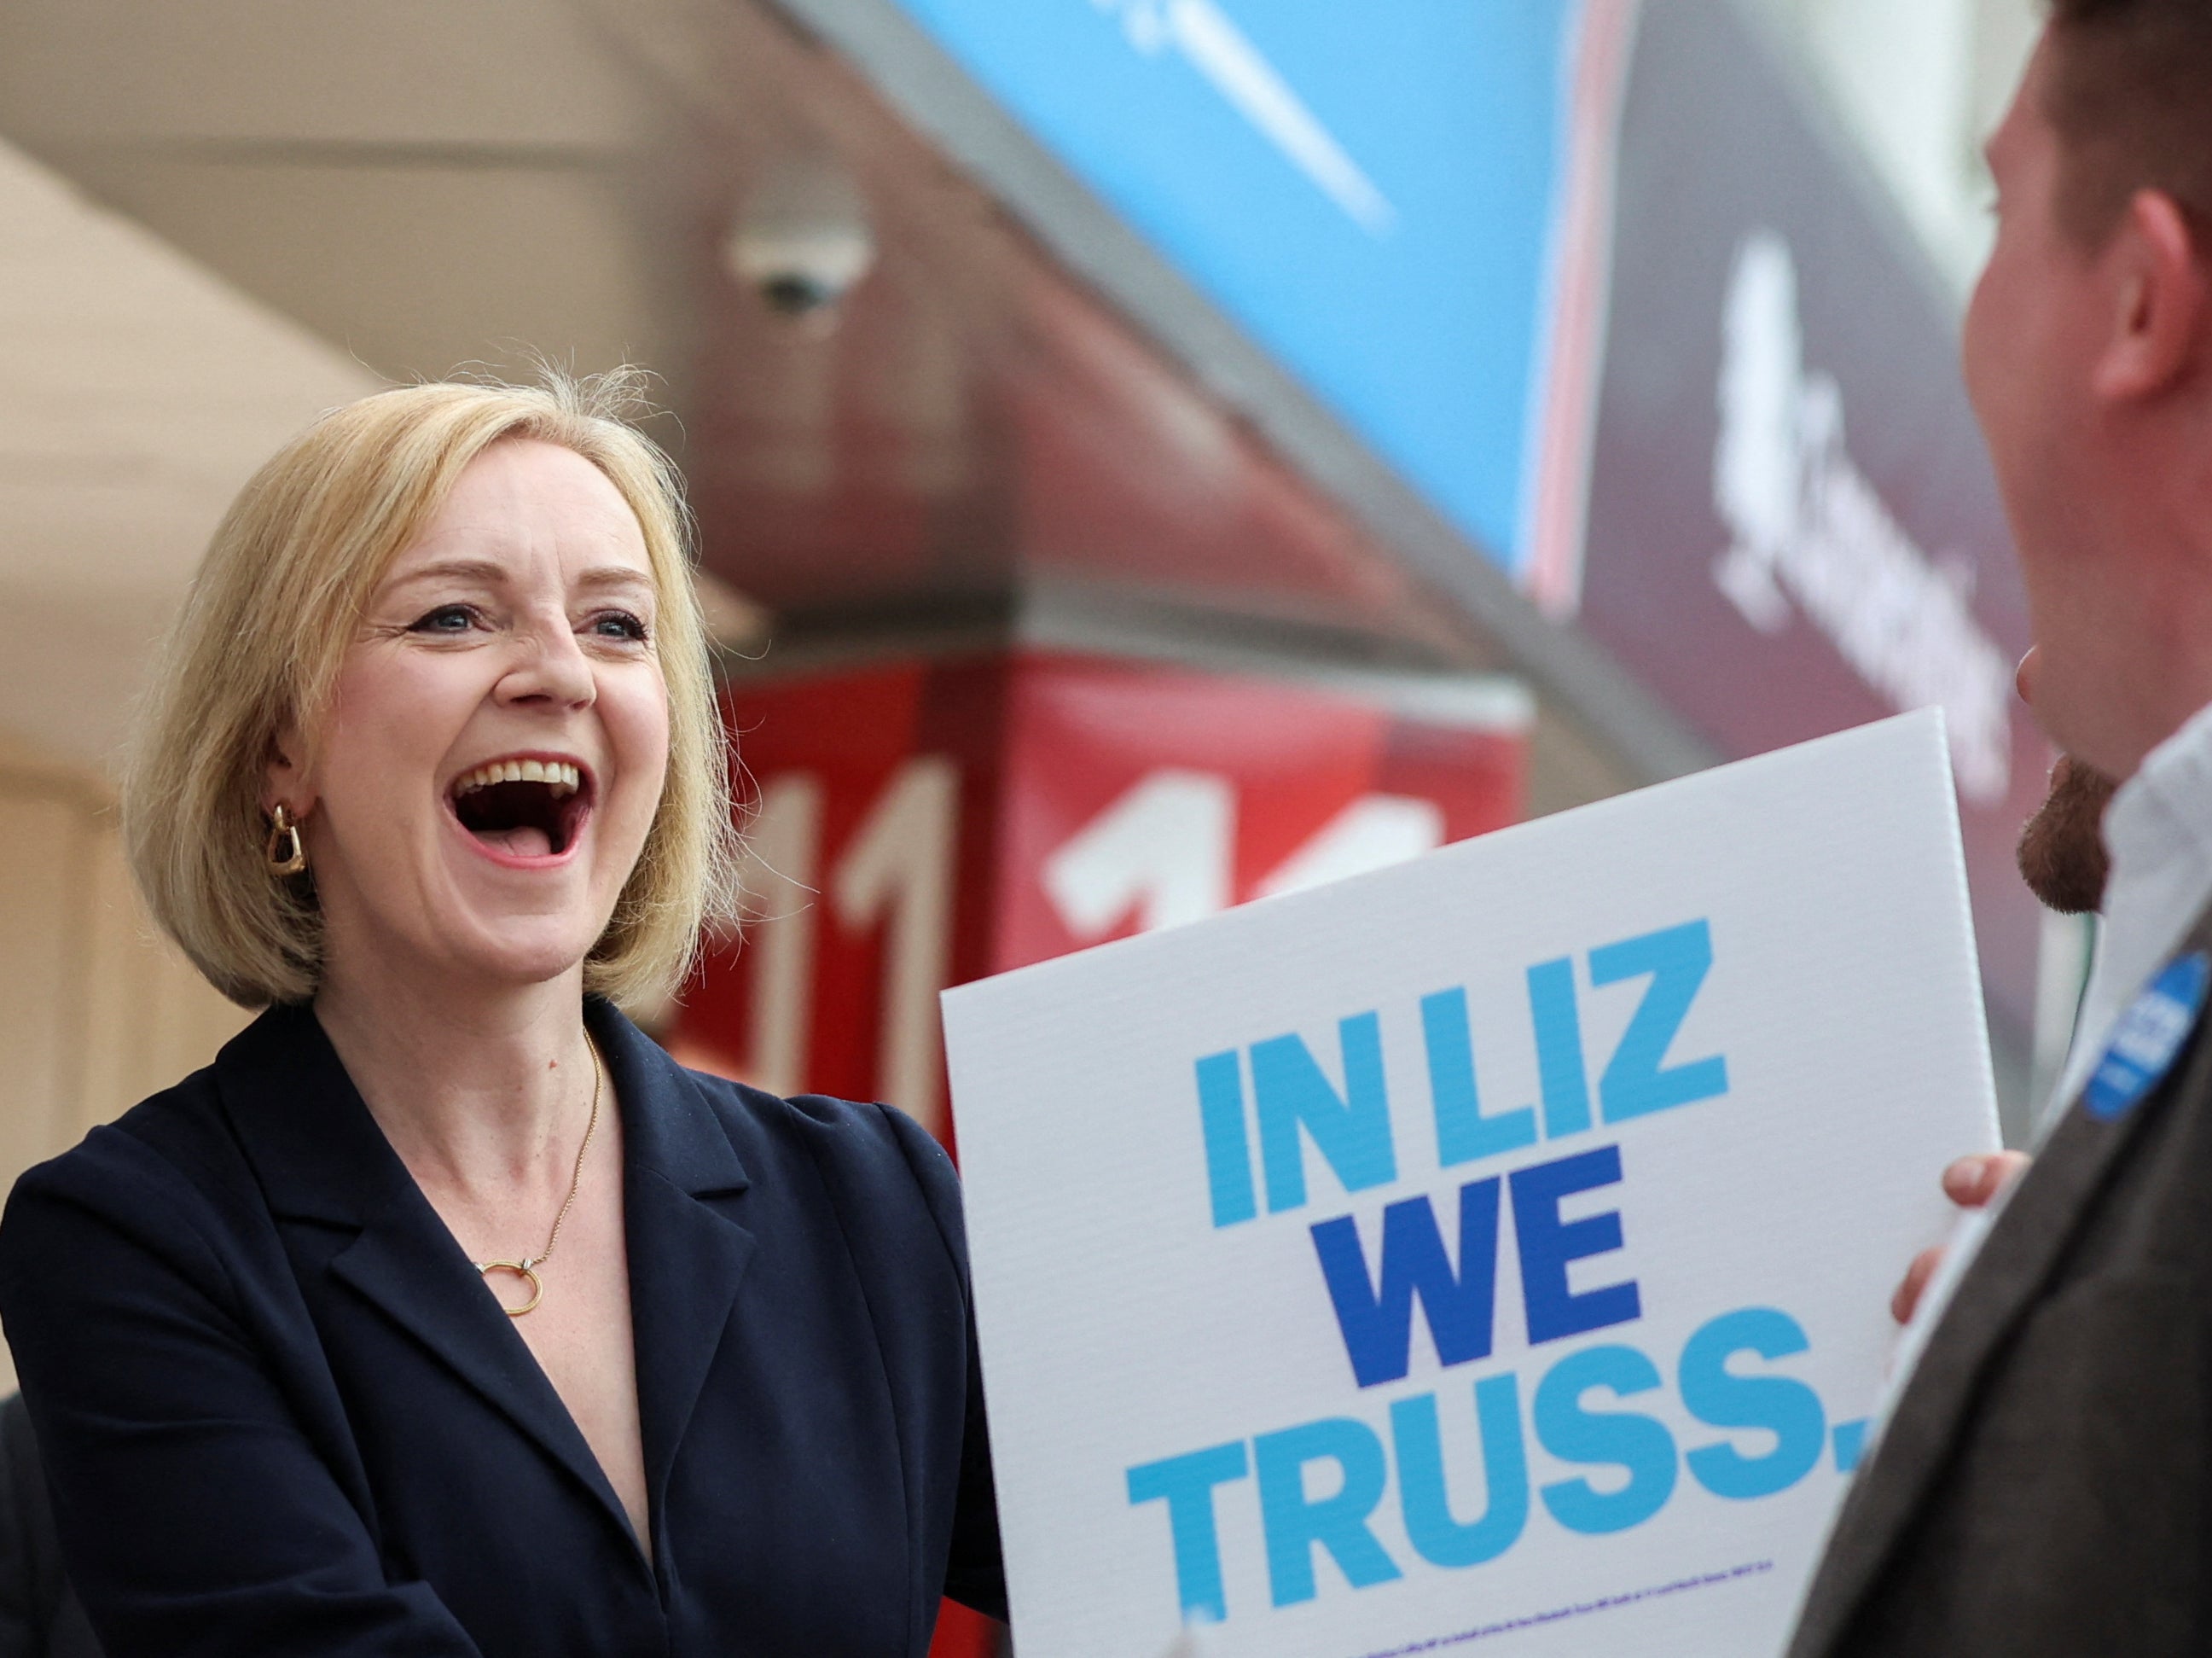 Liz Truss announced the crime targets as part of her Tory leadership campaign